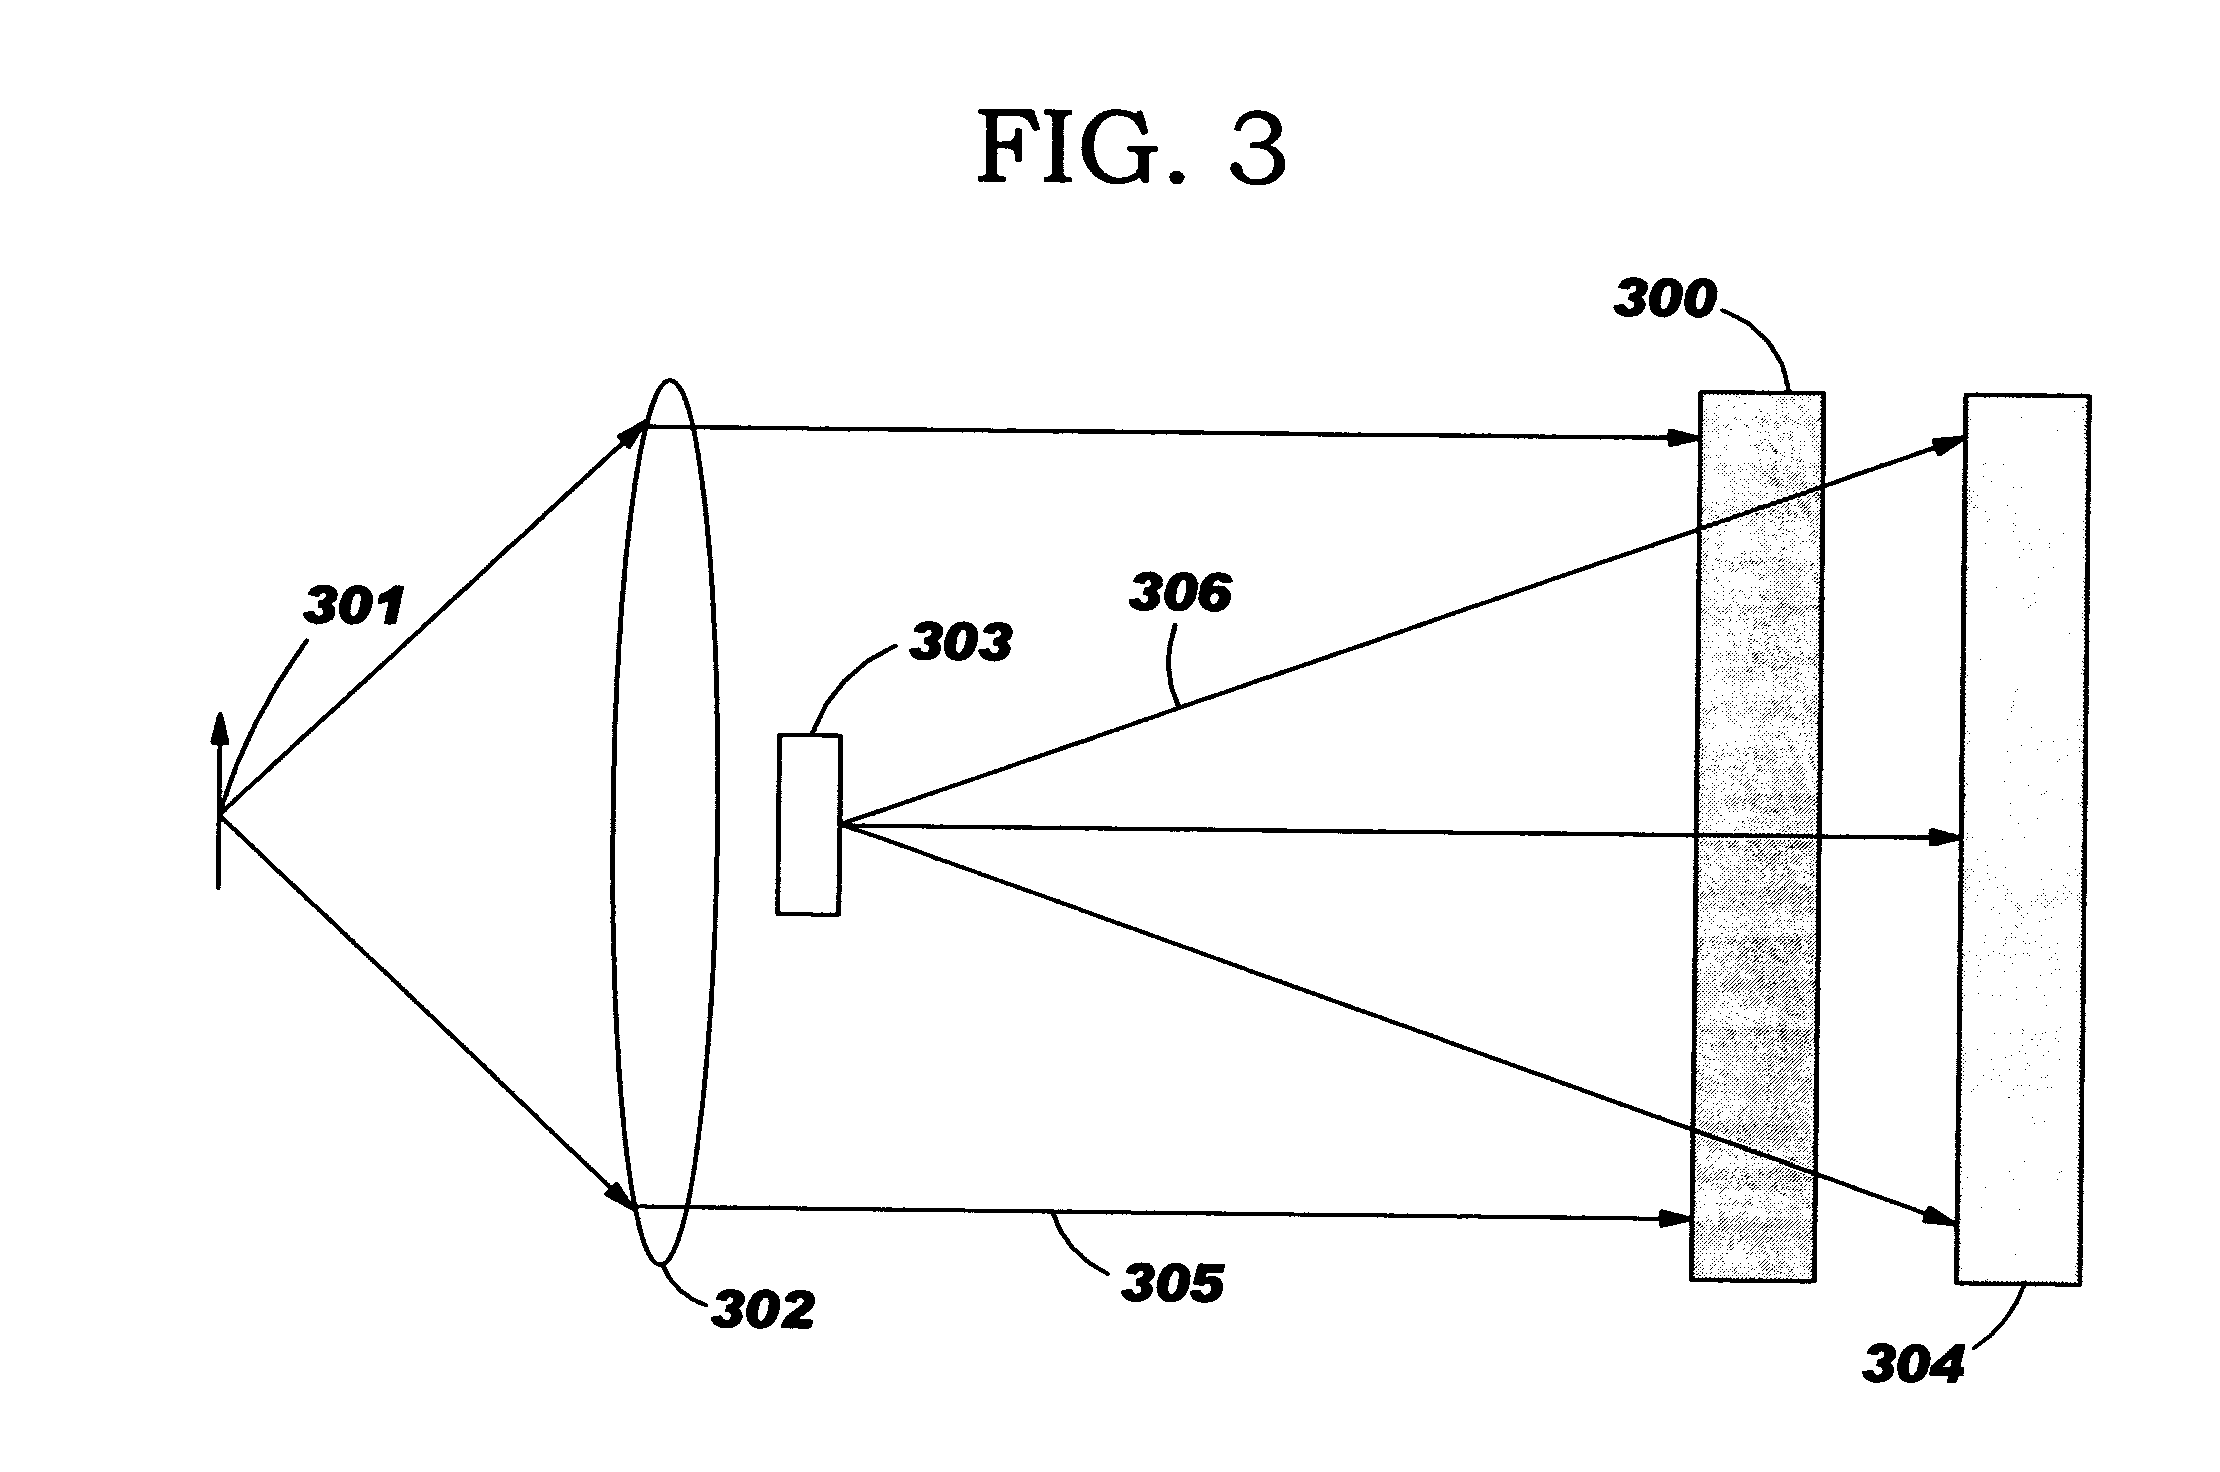 Radiation sensor with electro-thermal gain